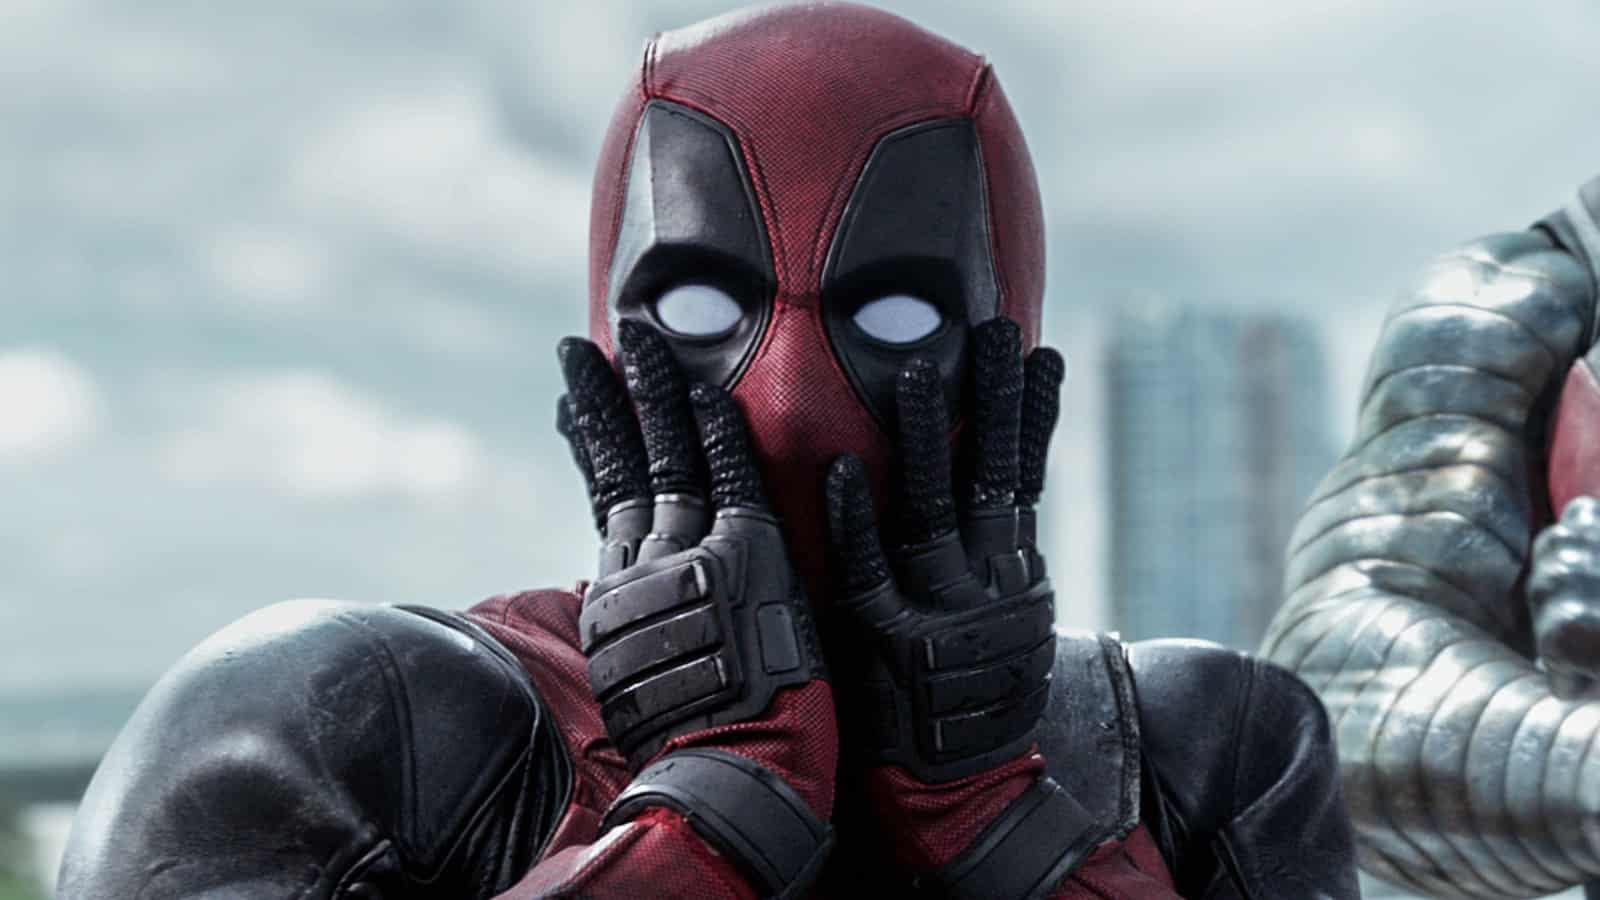 Deadpool 3 (September 6th, 2024) Movie Trailer, Cast and Plot Synopsis